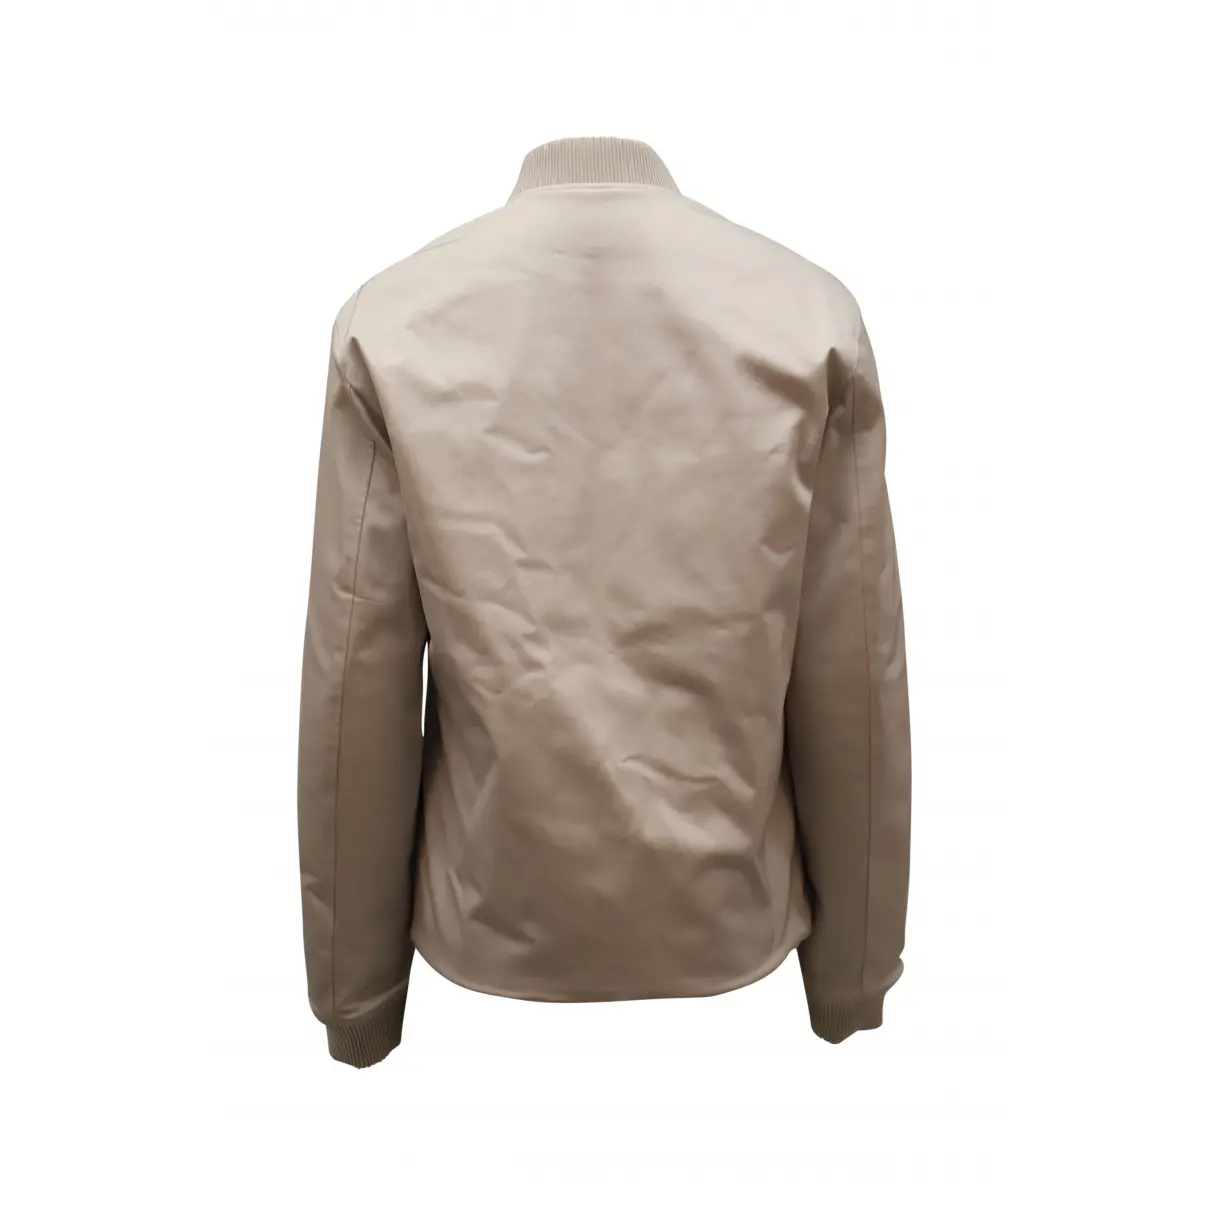 Buy Theory Jacket online